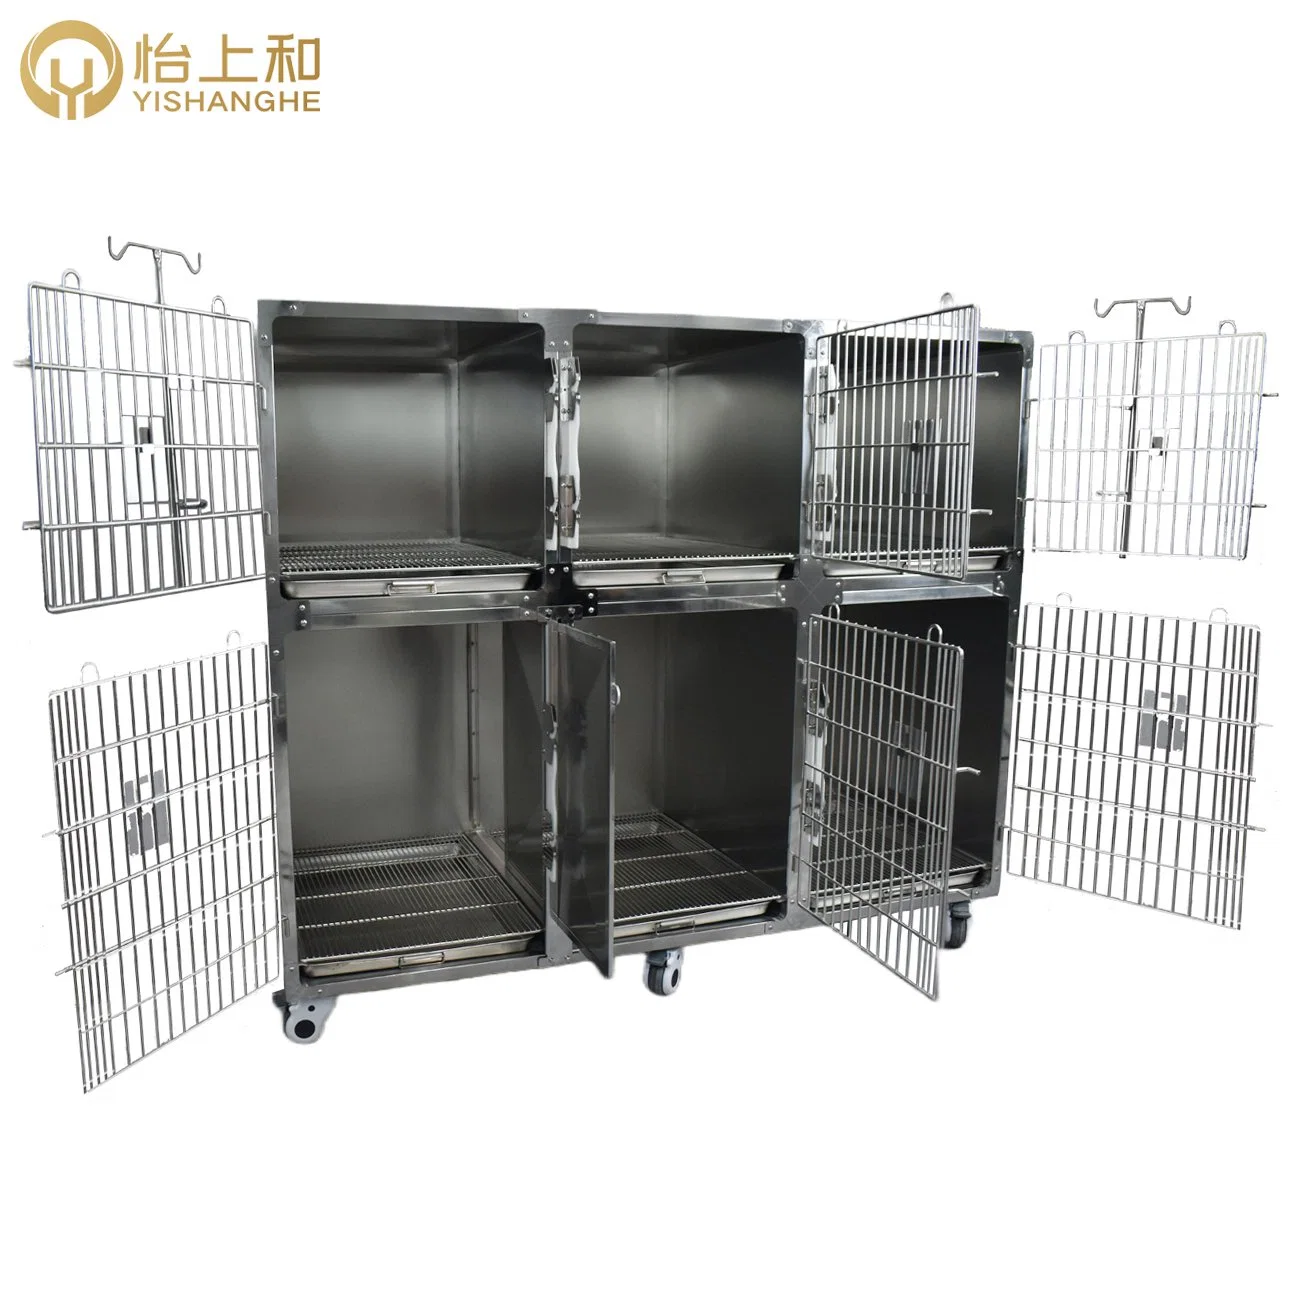 Pet Stainless Steel Metal Toilet Dog Cages Veterinary Display Cage Pet Product